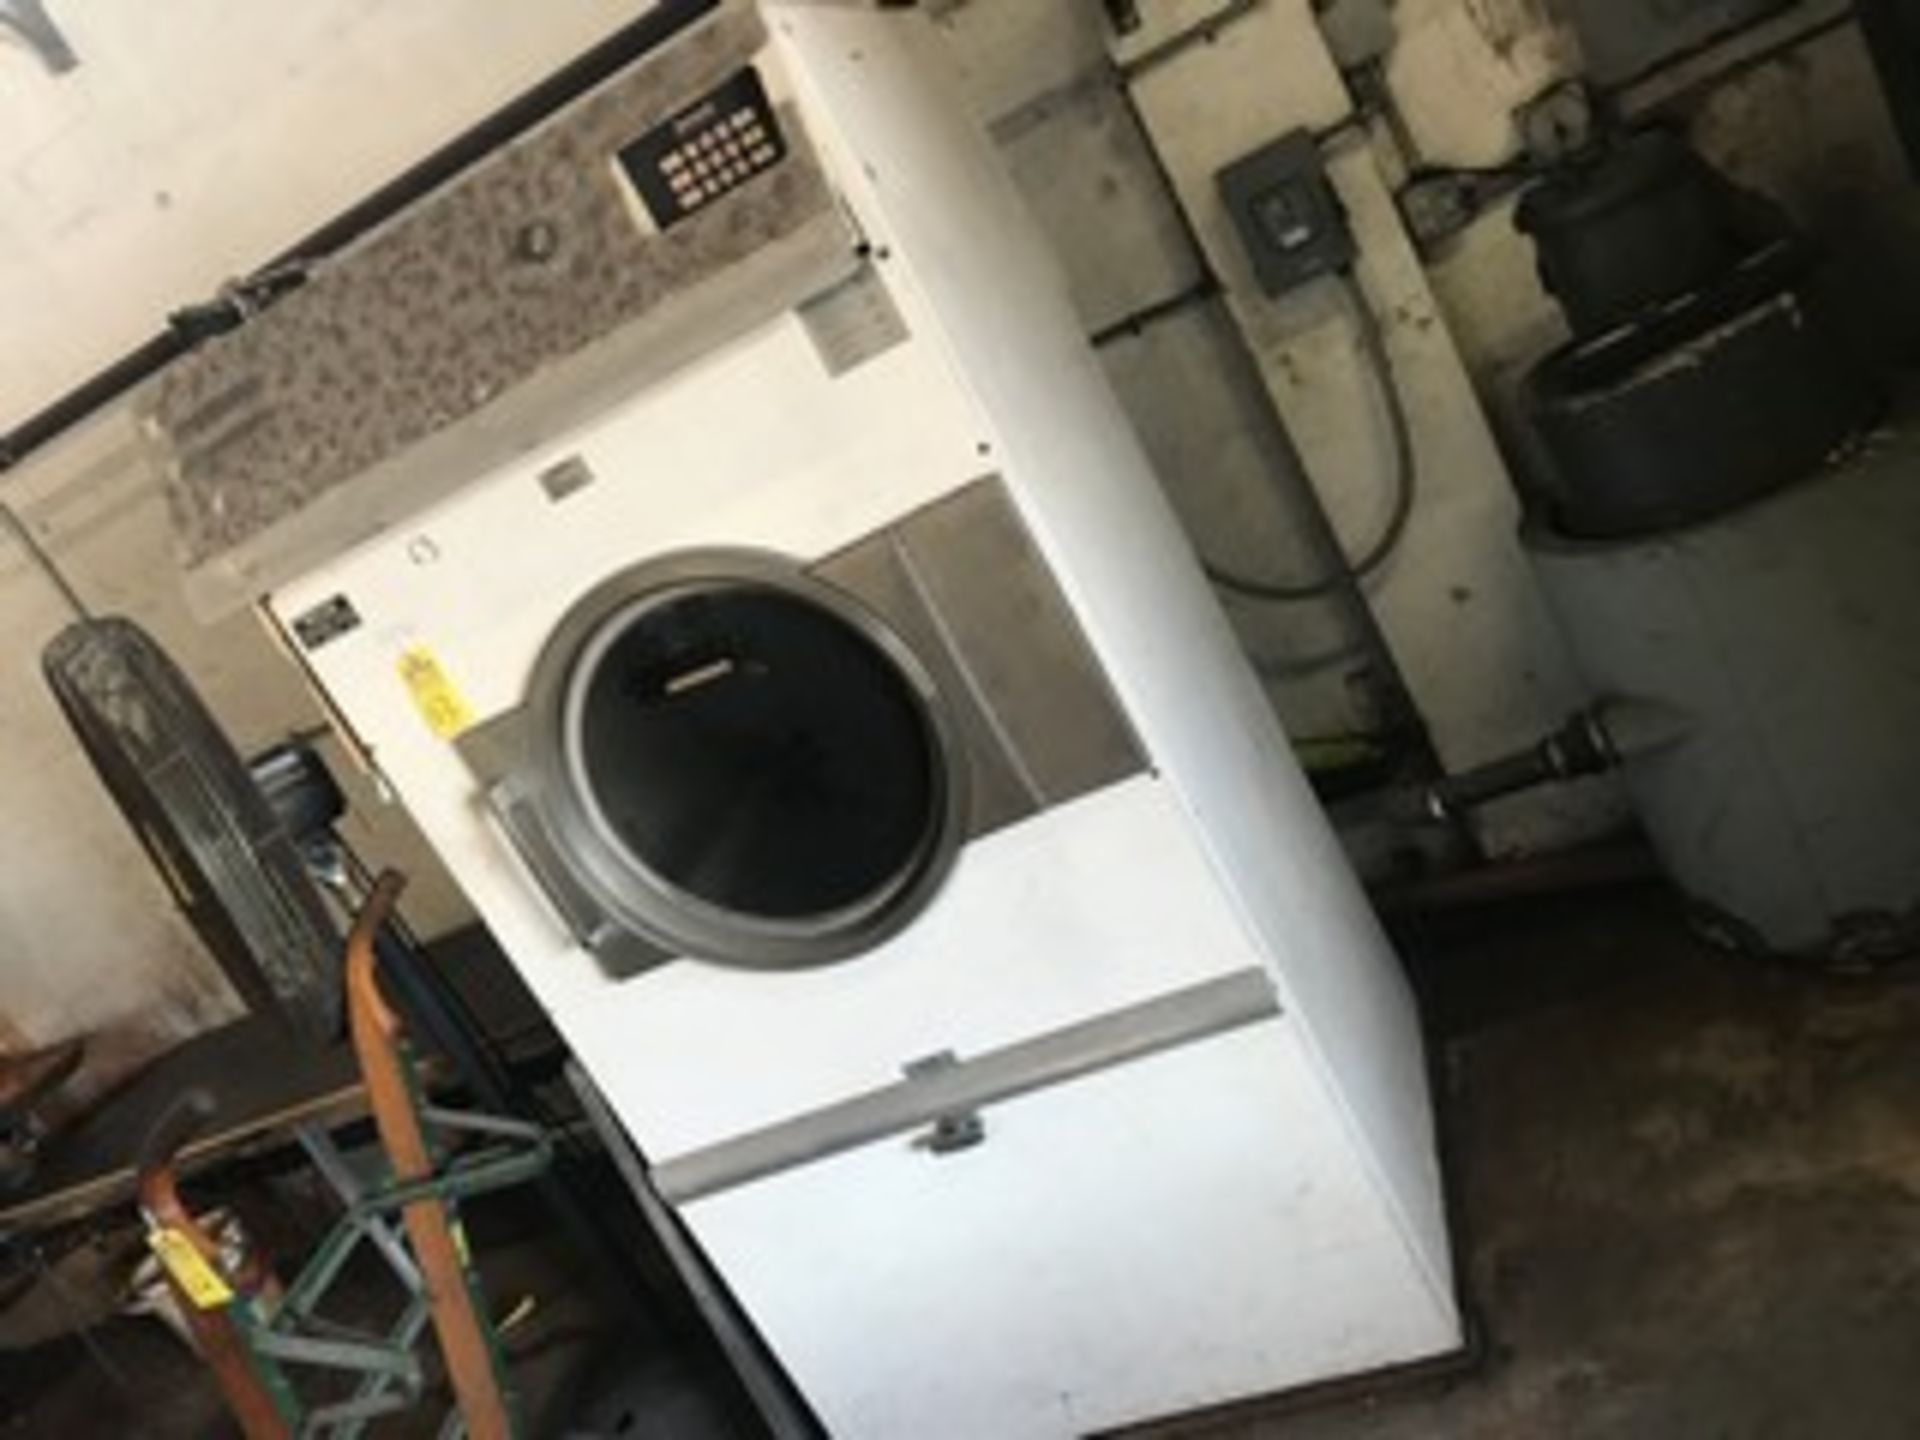 UNIDRYER 32583 COMMERCIAL DRYER - Image 2 of 3